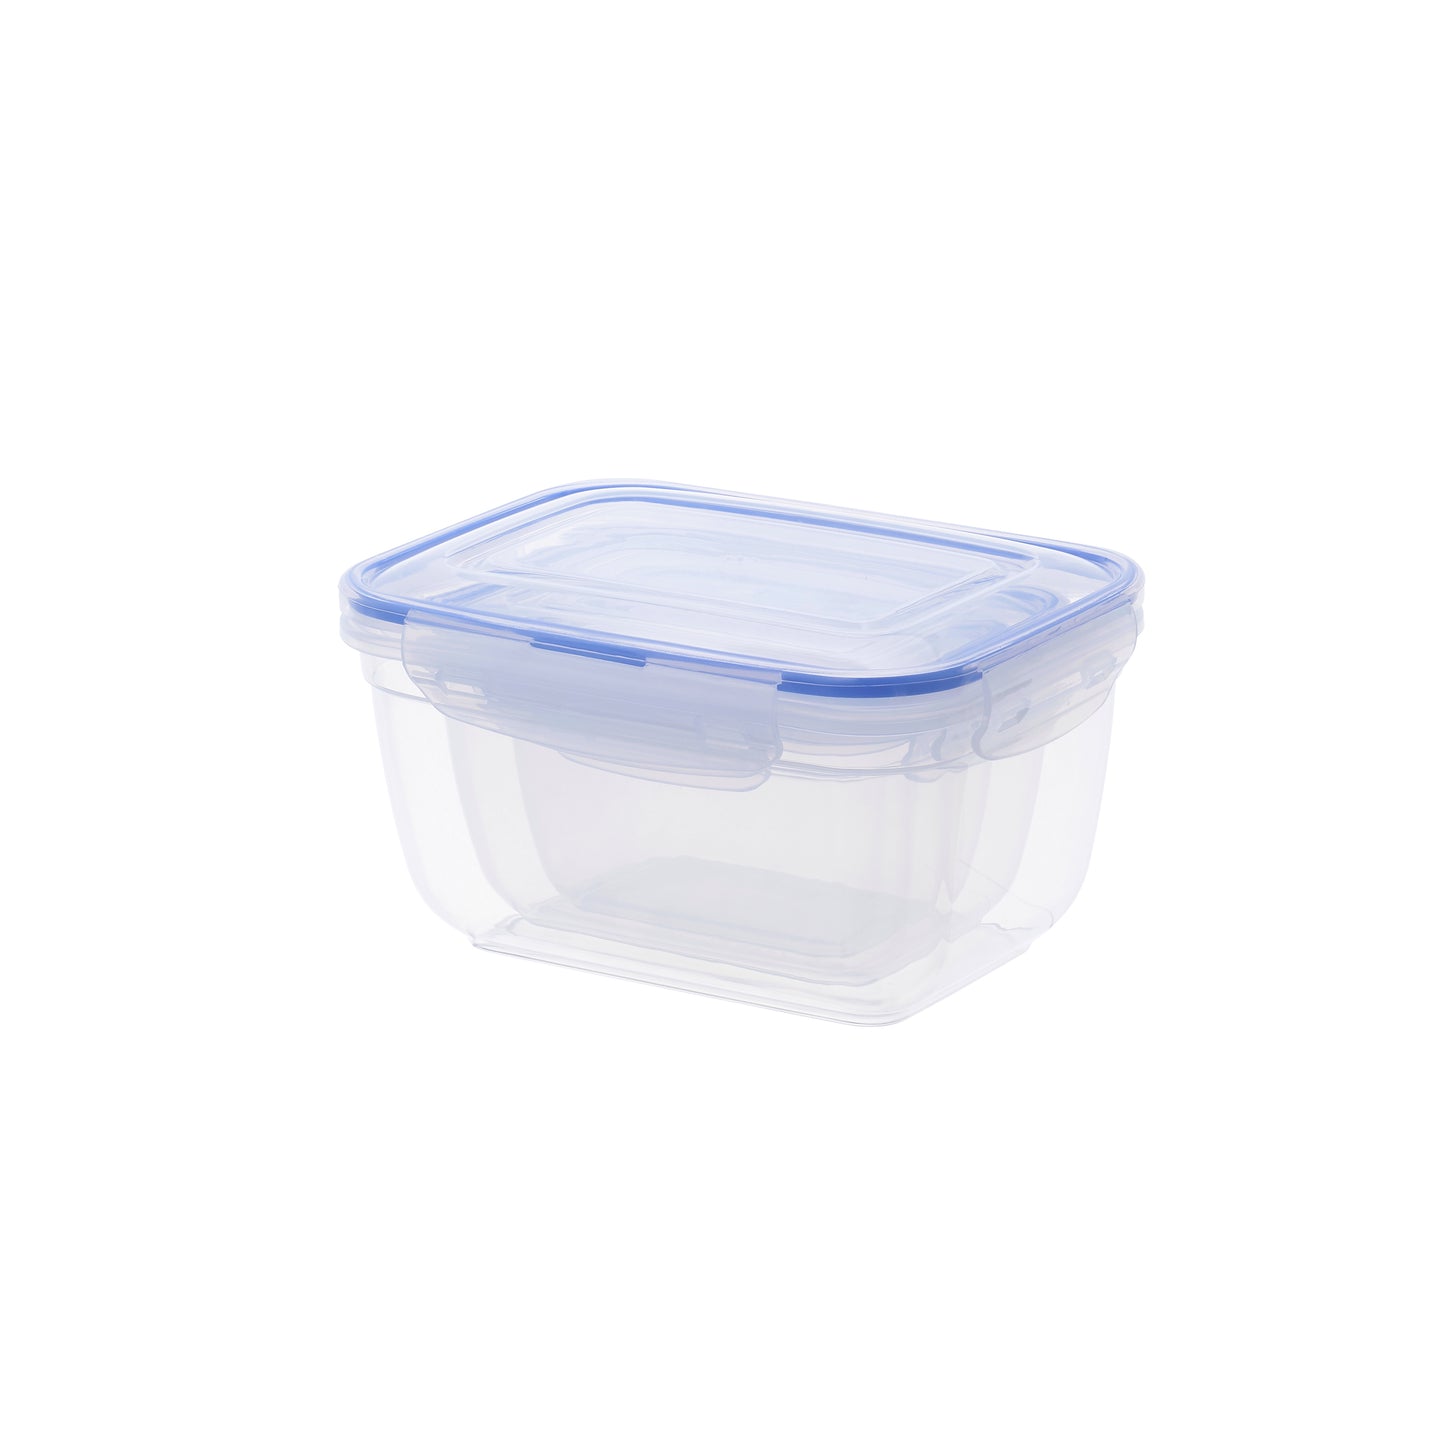 14 Pack Kitchen Plastic Food Containers with Airtight Lids Leak